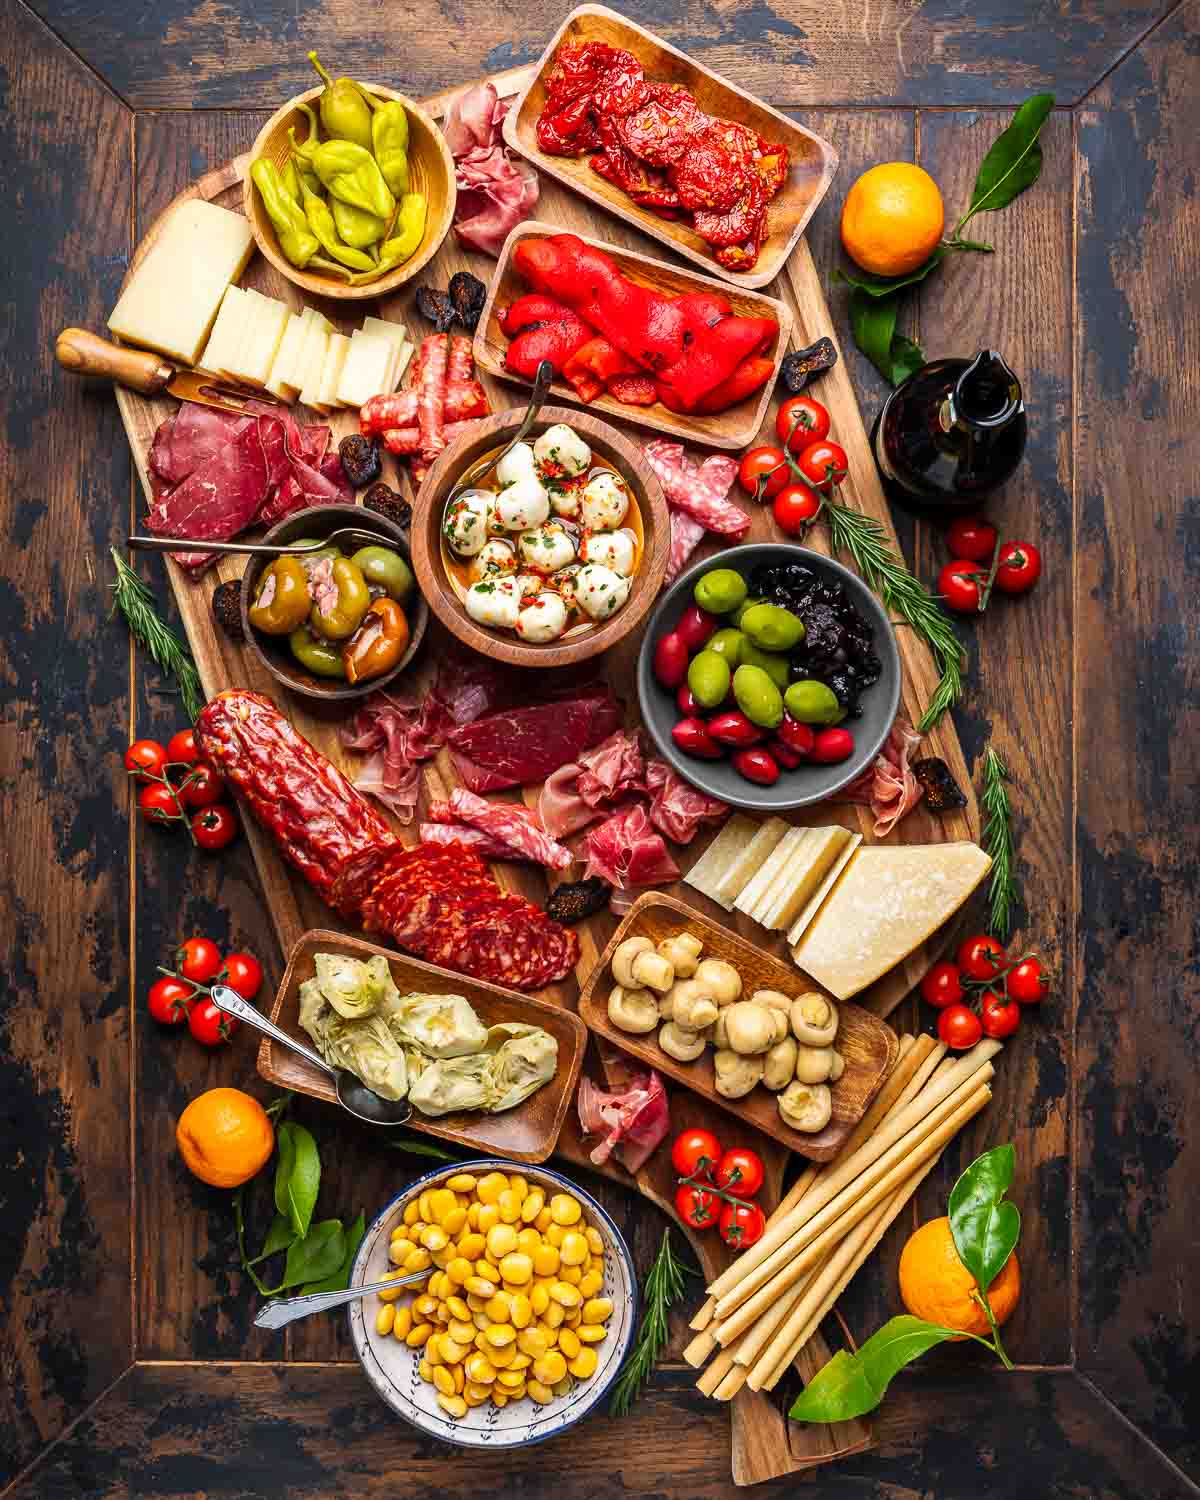 Large antipasto platter with meats, cheeses, olives, and pickled vegetables.